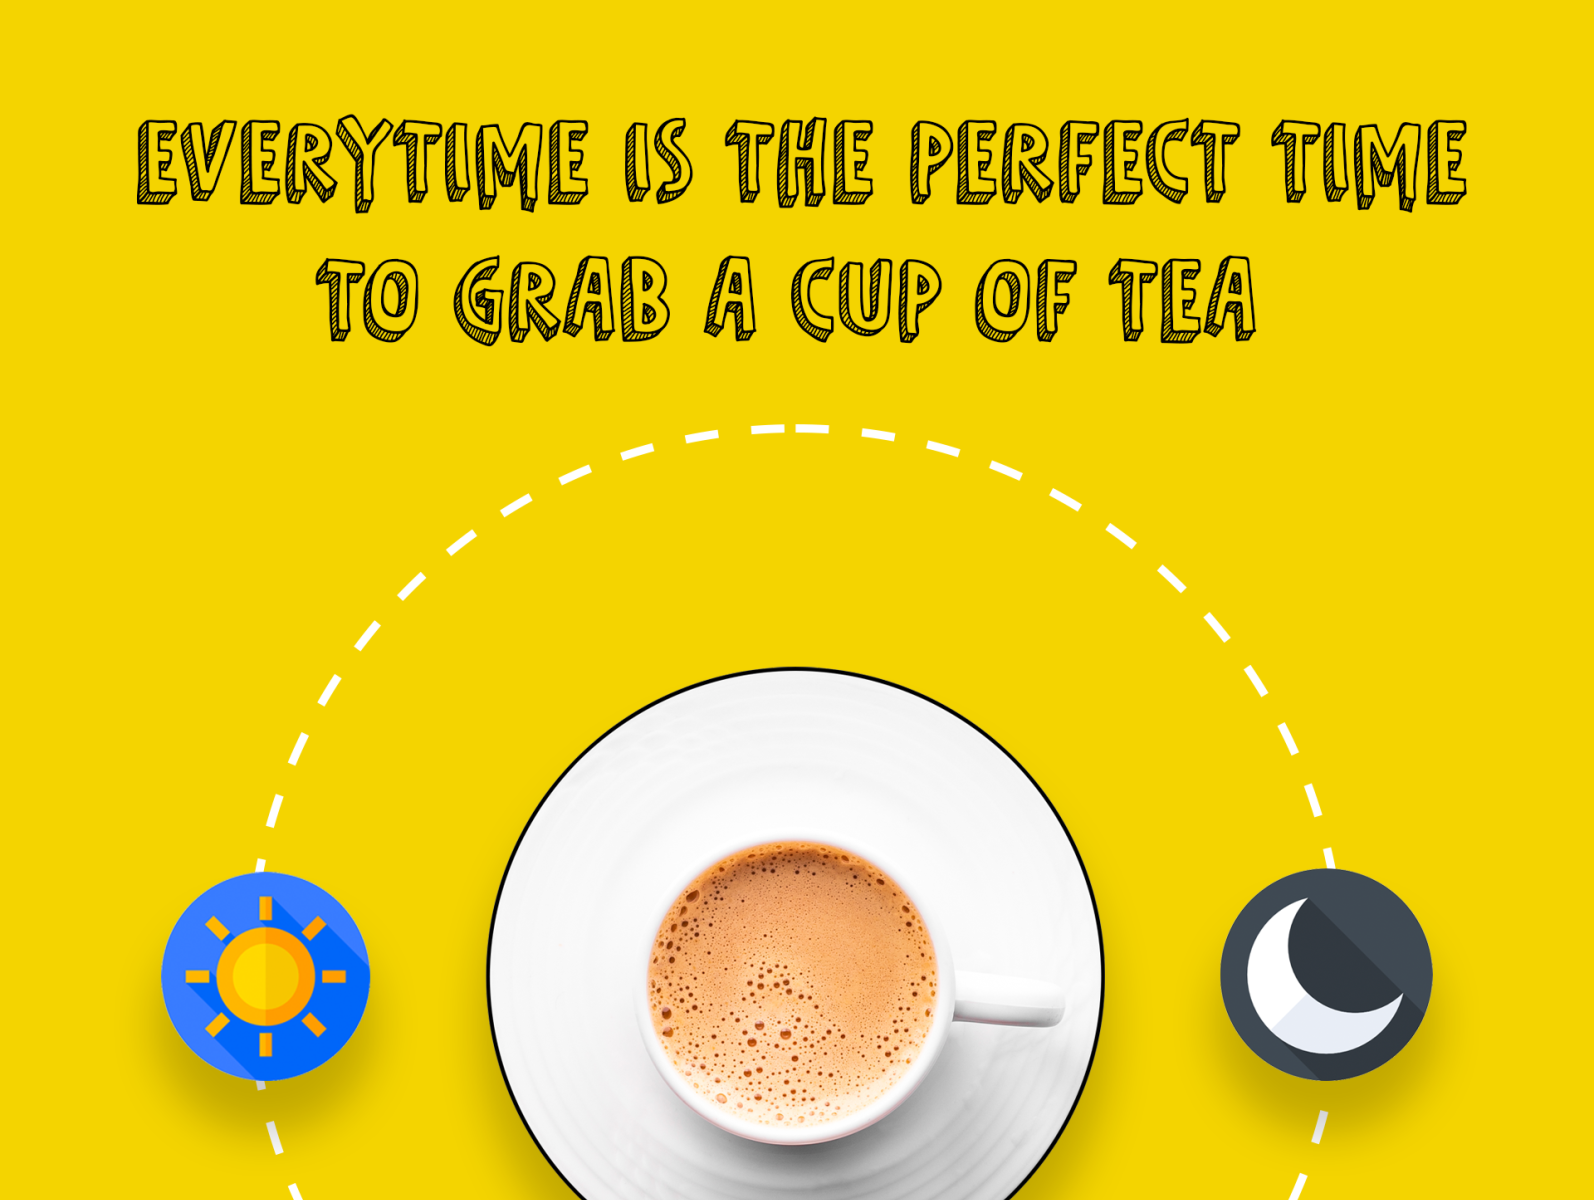 Every time is the perfect time for tea break by Rise Genie on Dribbble